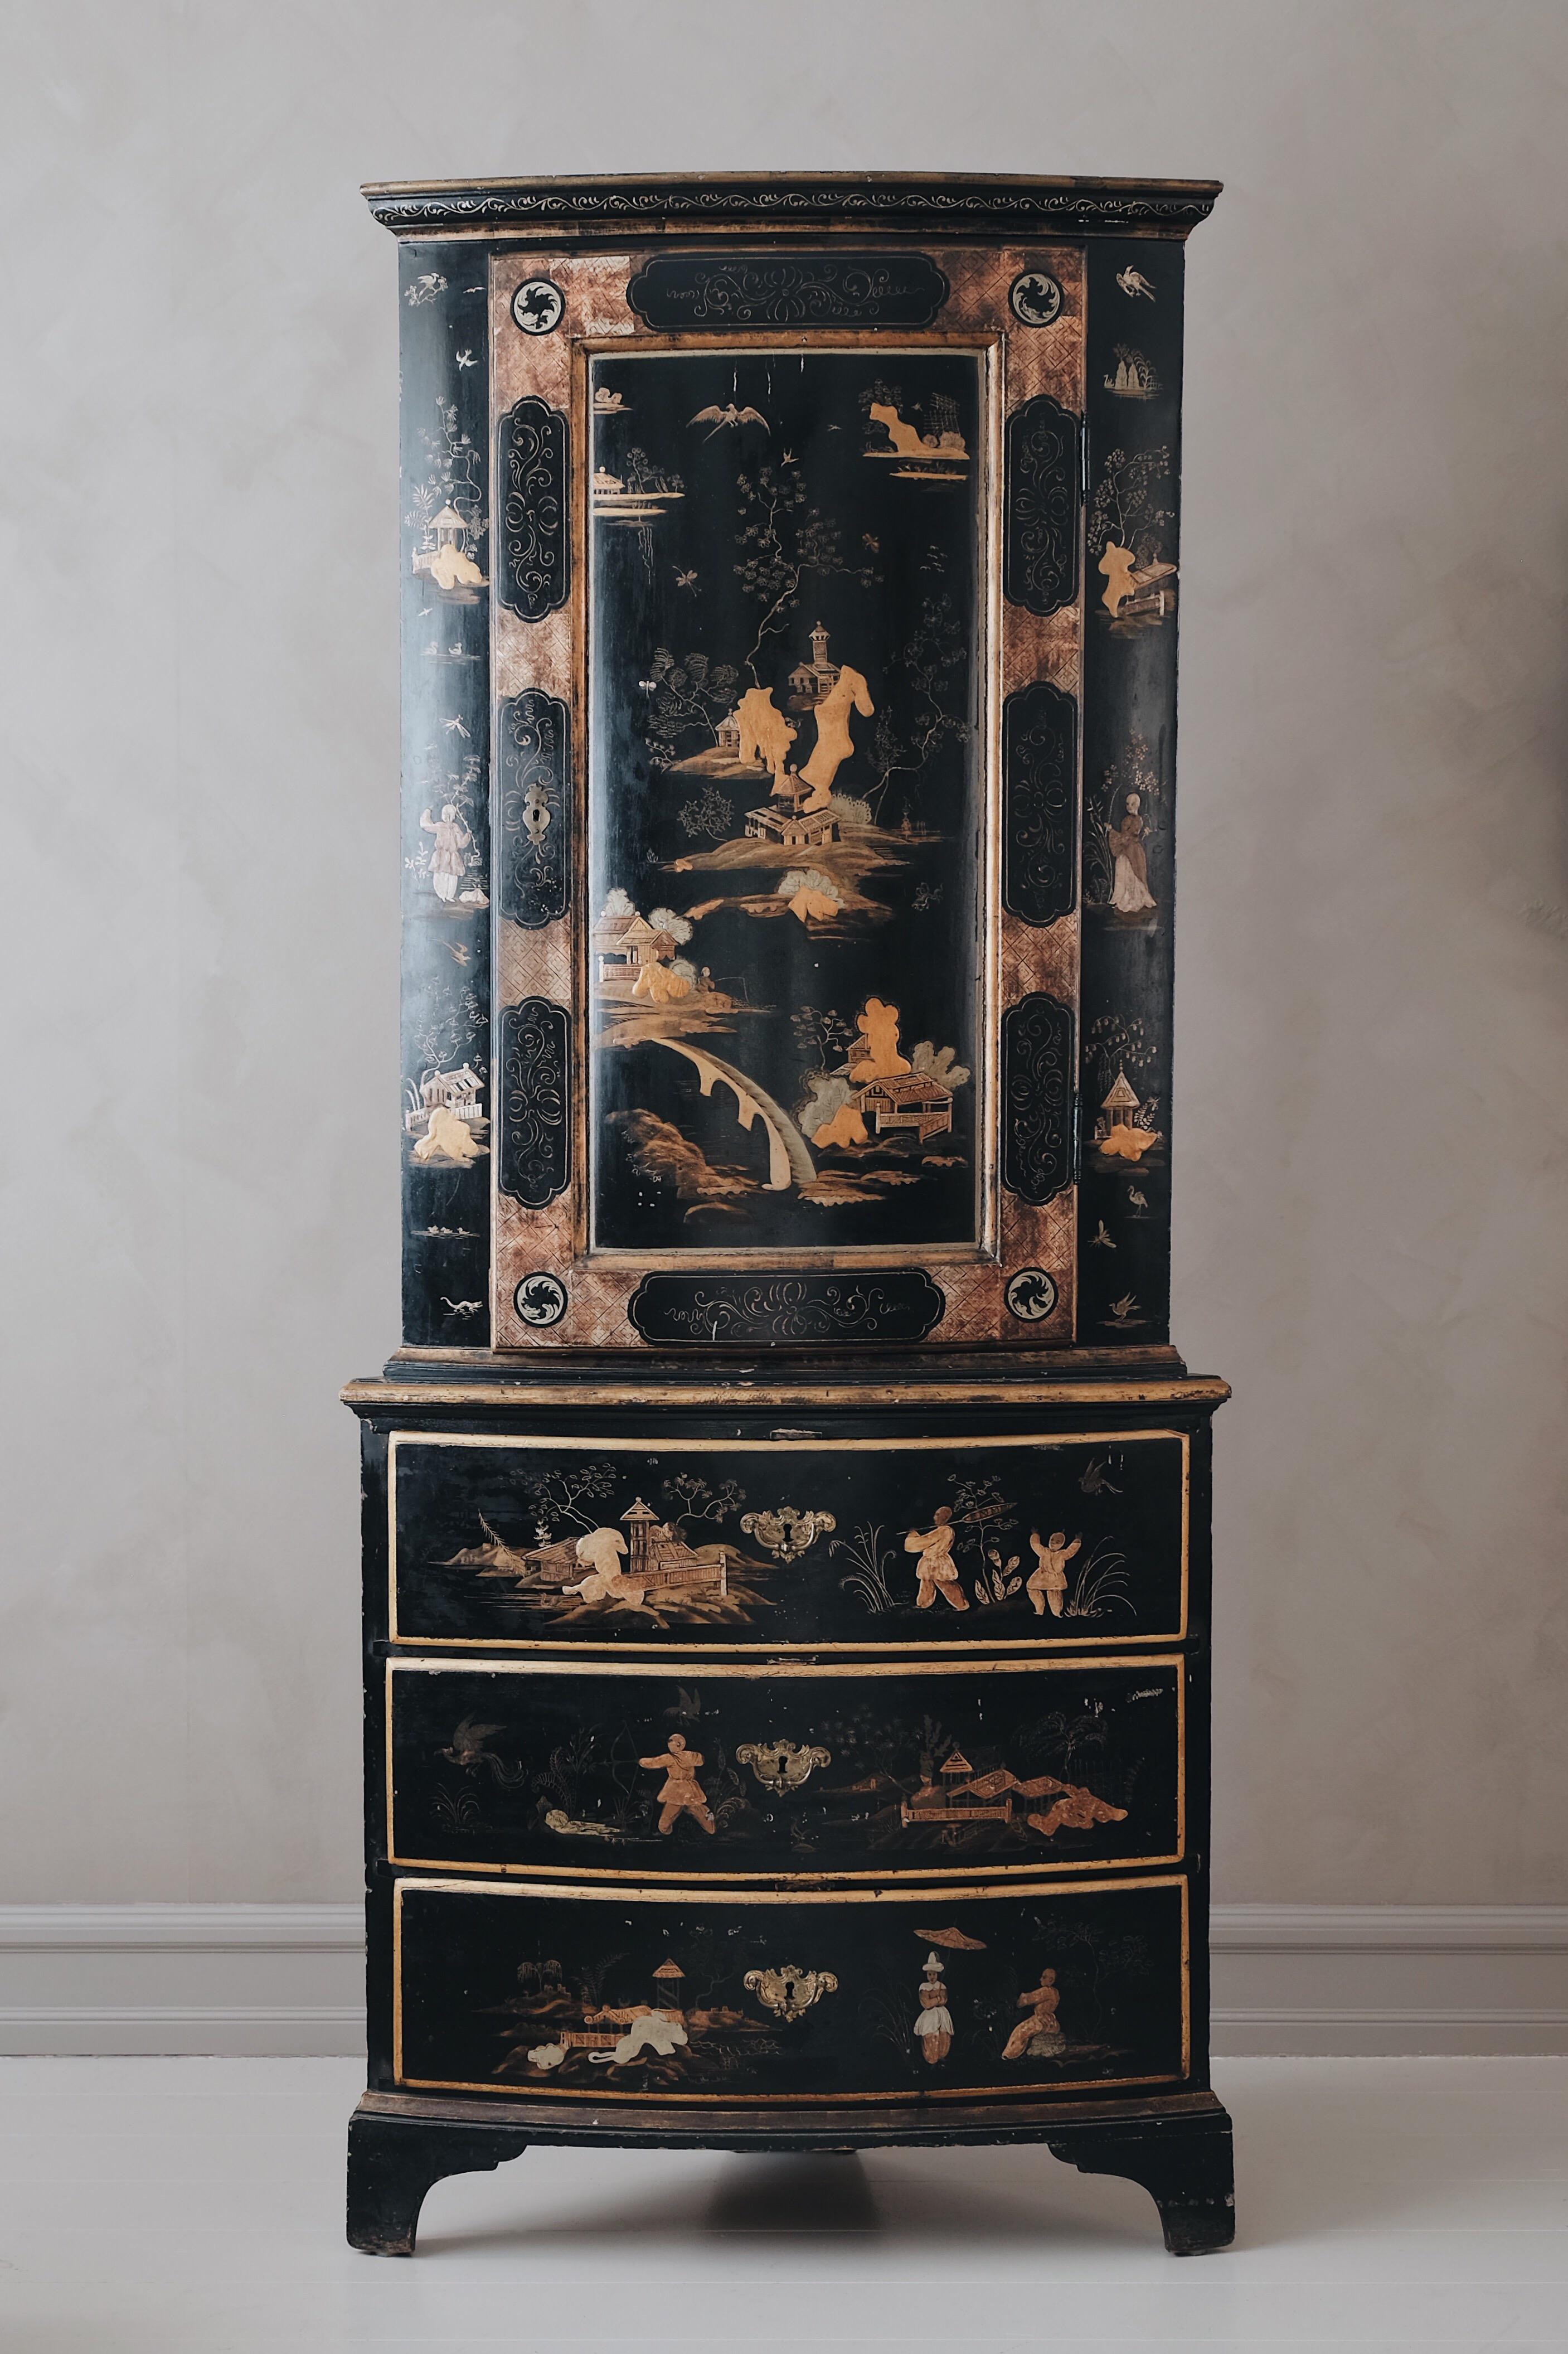 Remarkable and very rare 18th century Swedish late Baroque chinoiserie corner cabinet, circa 1750 Stockholm. 

Embodying the 18th century European dream of China with its Chinese motifs made in golden and silver leaf. Although this cabinet has